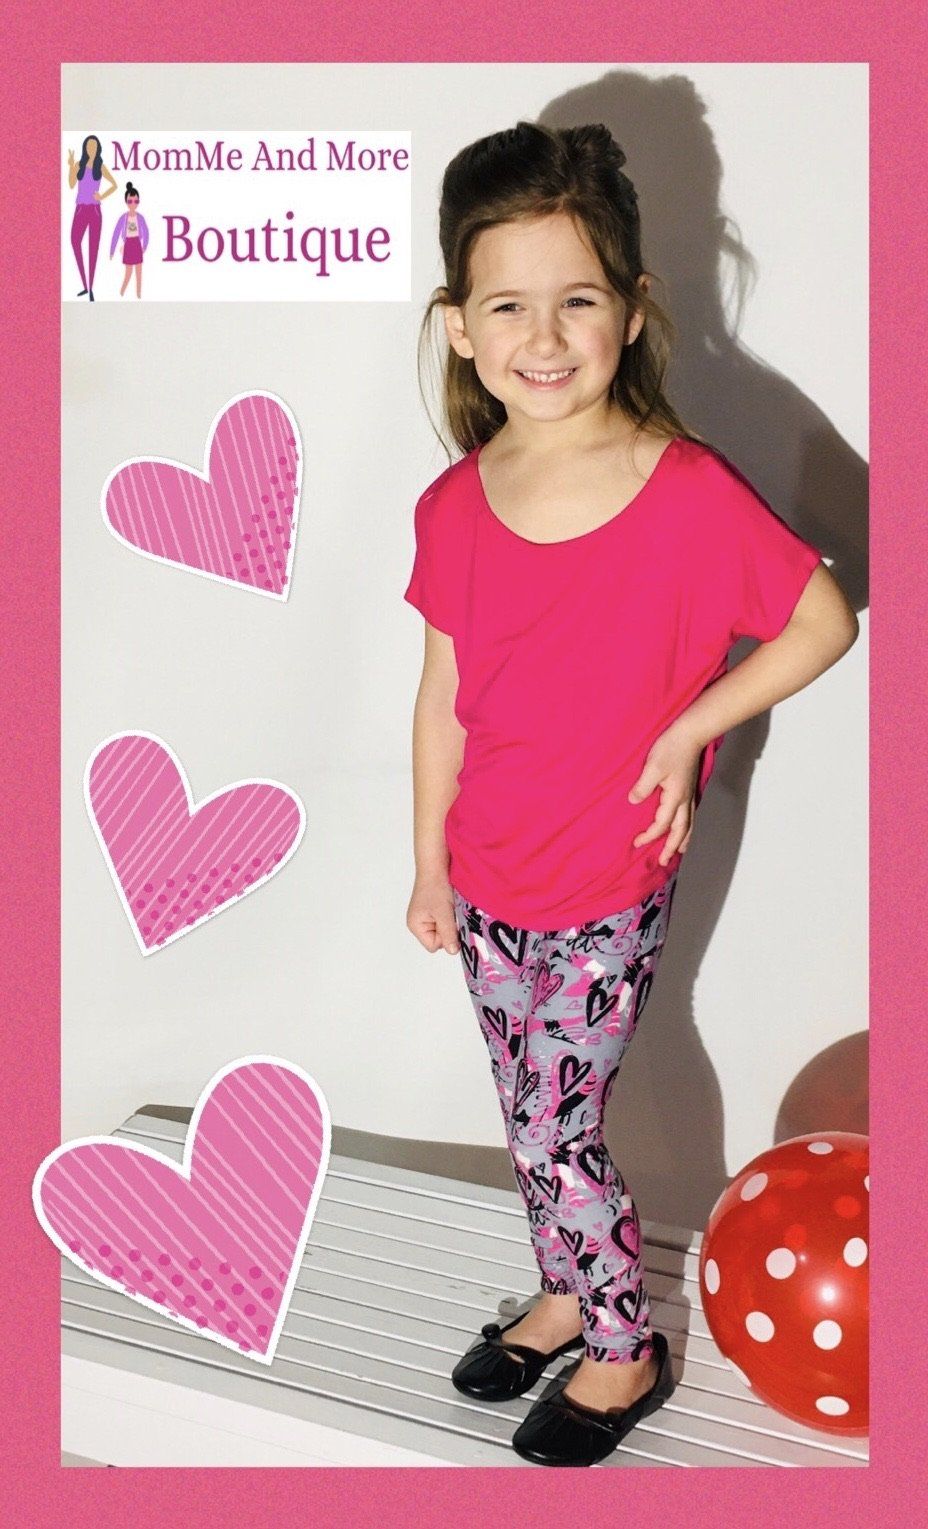 Kids Leggings with Hearts Valentines Gifts for Girls by Rachael Grad